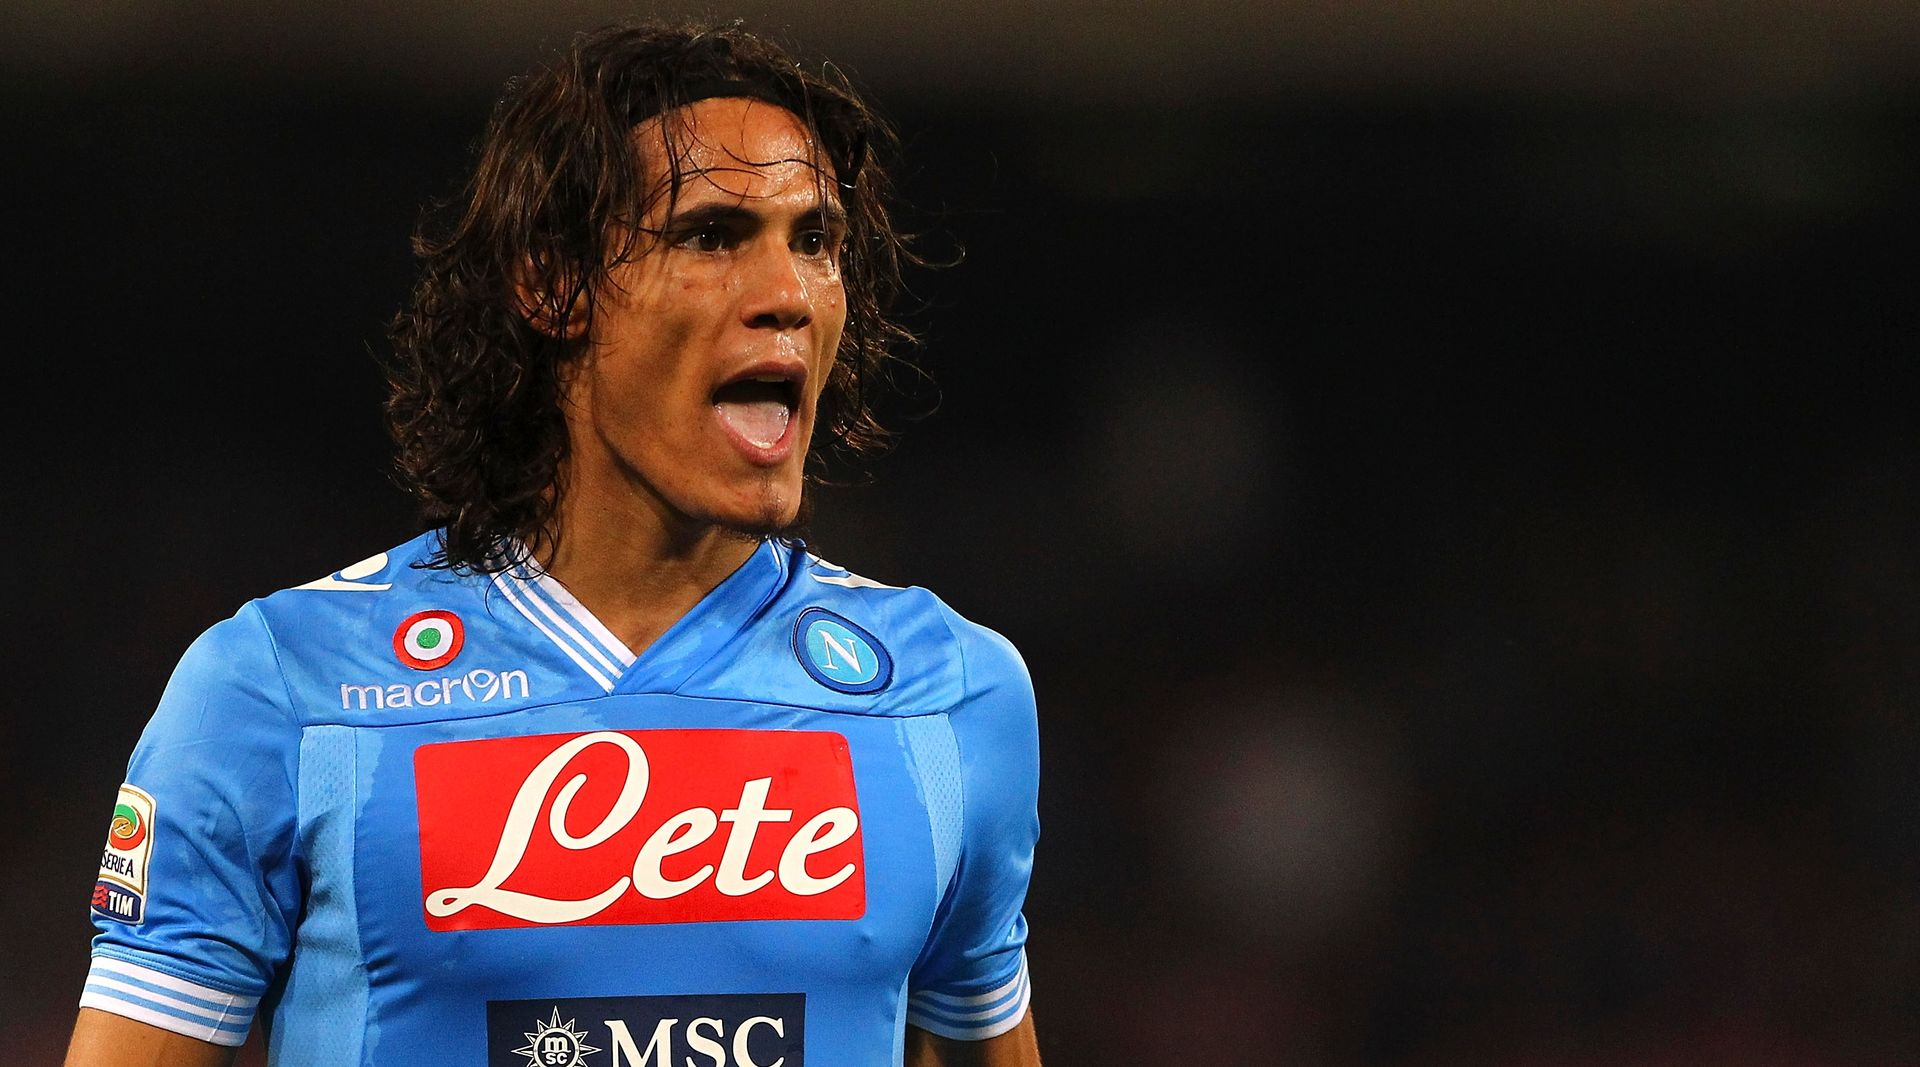 <p>                     Edinson Cavani showed great goalscoring promise at Palermo – and he turned that into phenomenal goalscoring <em>prowess</em> after his 2010 switch to Napoli.                   </p>                                      <p>                     Utterly ruthless during his three-season spell with the Partenopei, the iconic Uruguayan frontman found the net 78 times in 104 Serie A outings, scooping the <em>Capocannoniere </em>with 29 goals in 2012/13.                   </p>